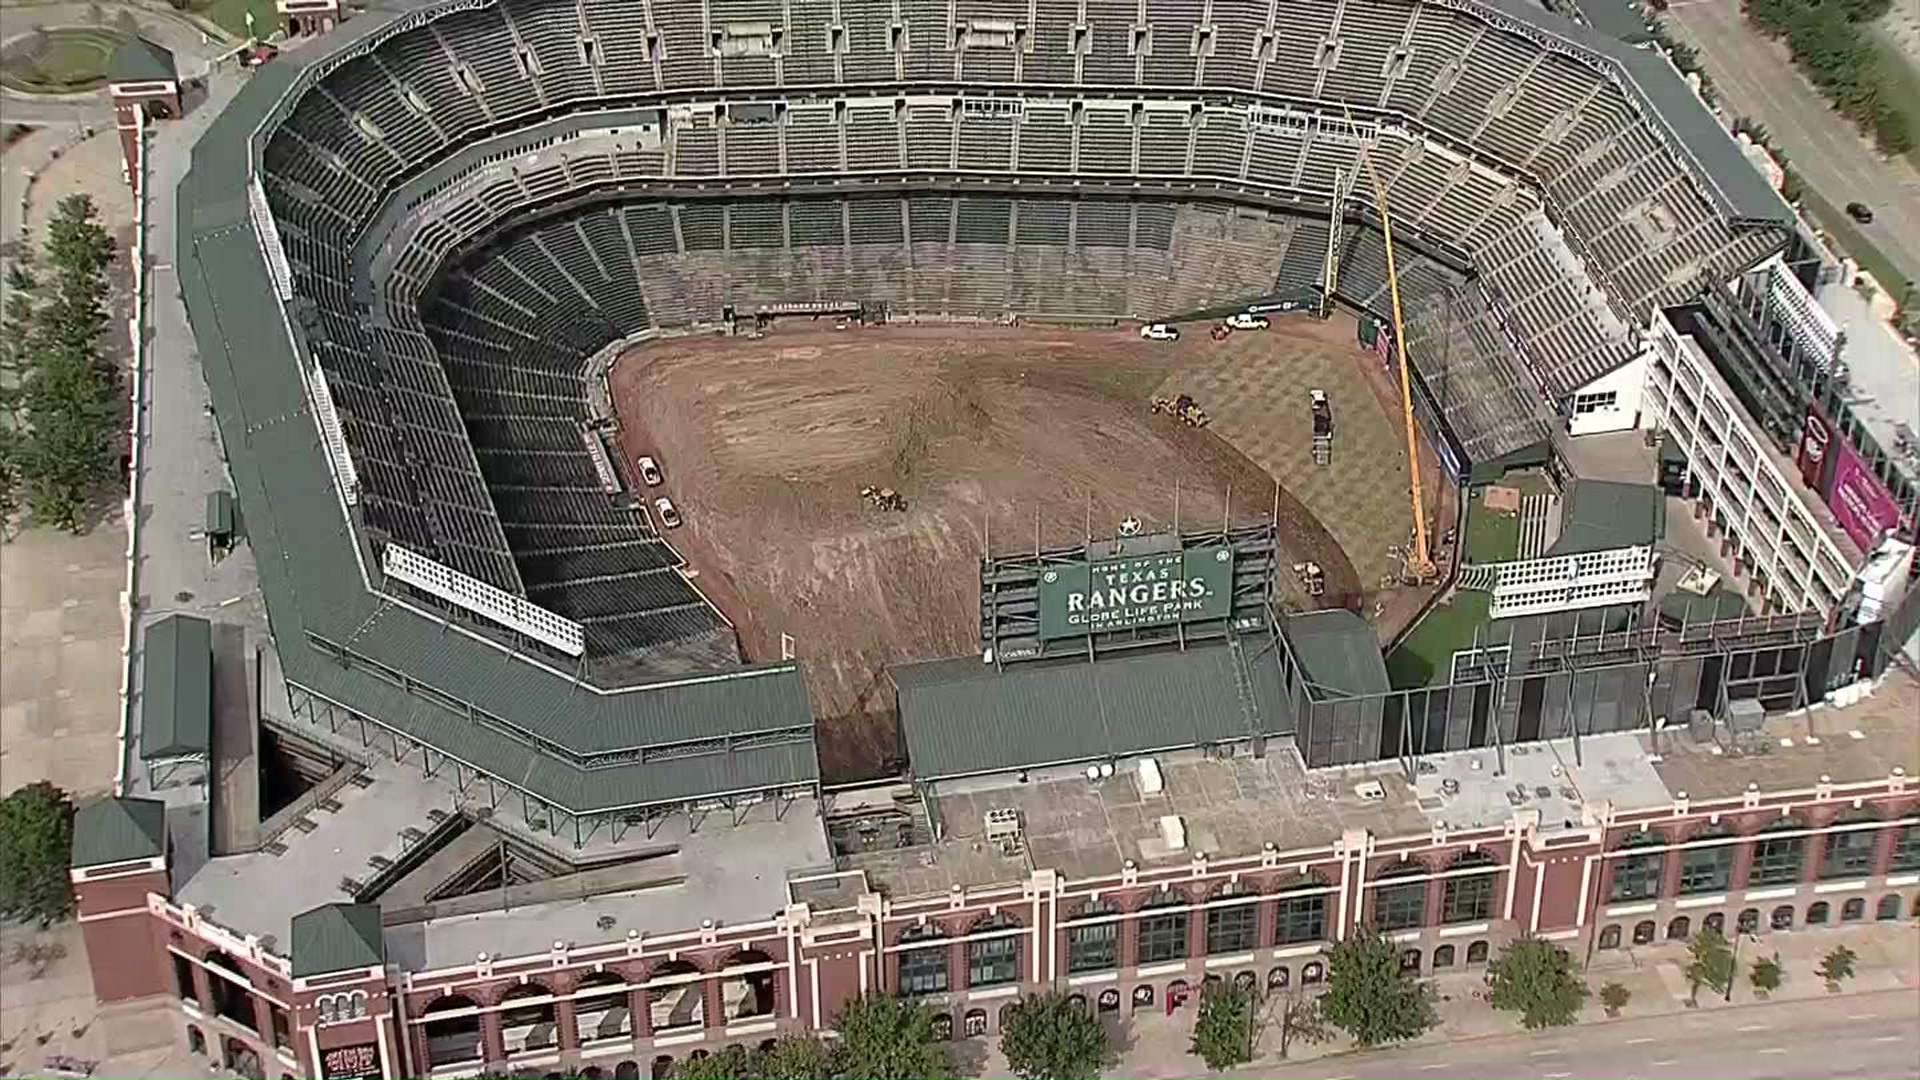 Construction Underway at Globe Life Park for New Reconfiguration